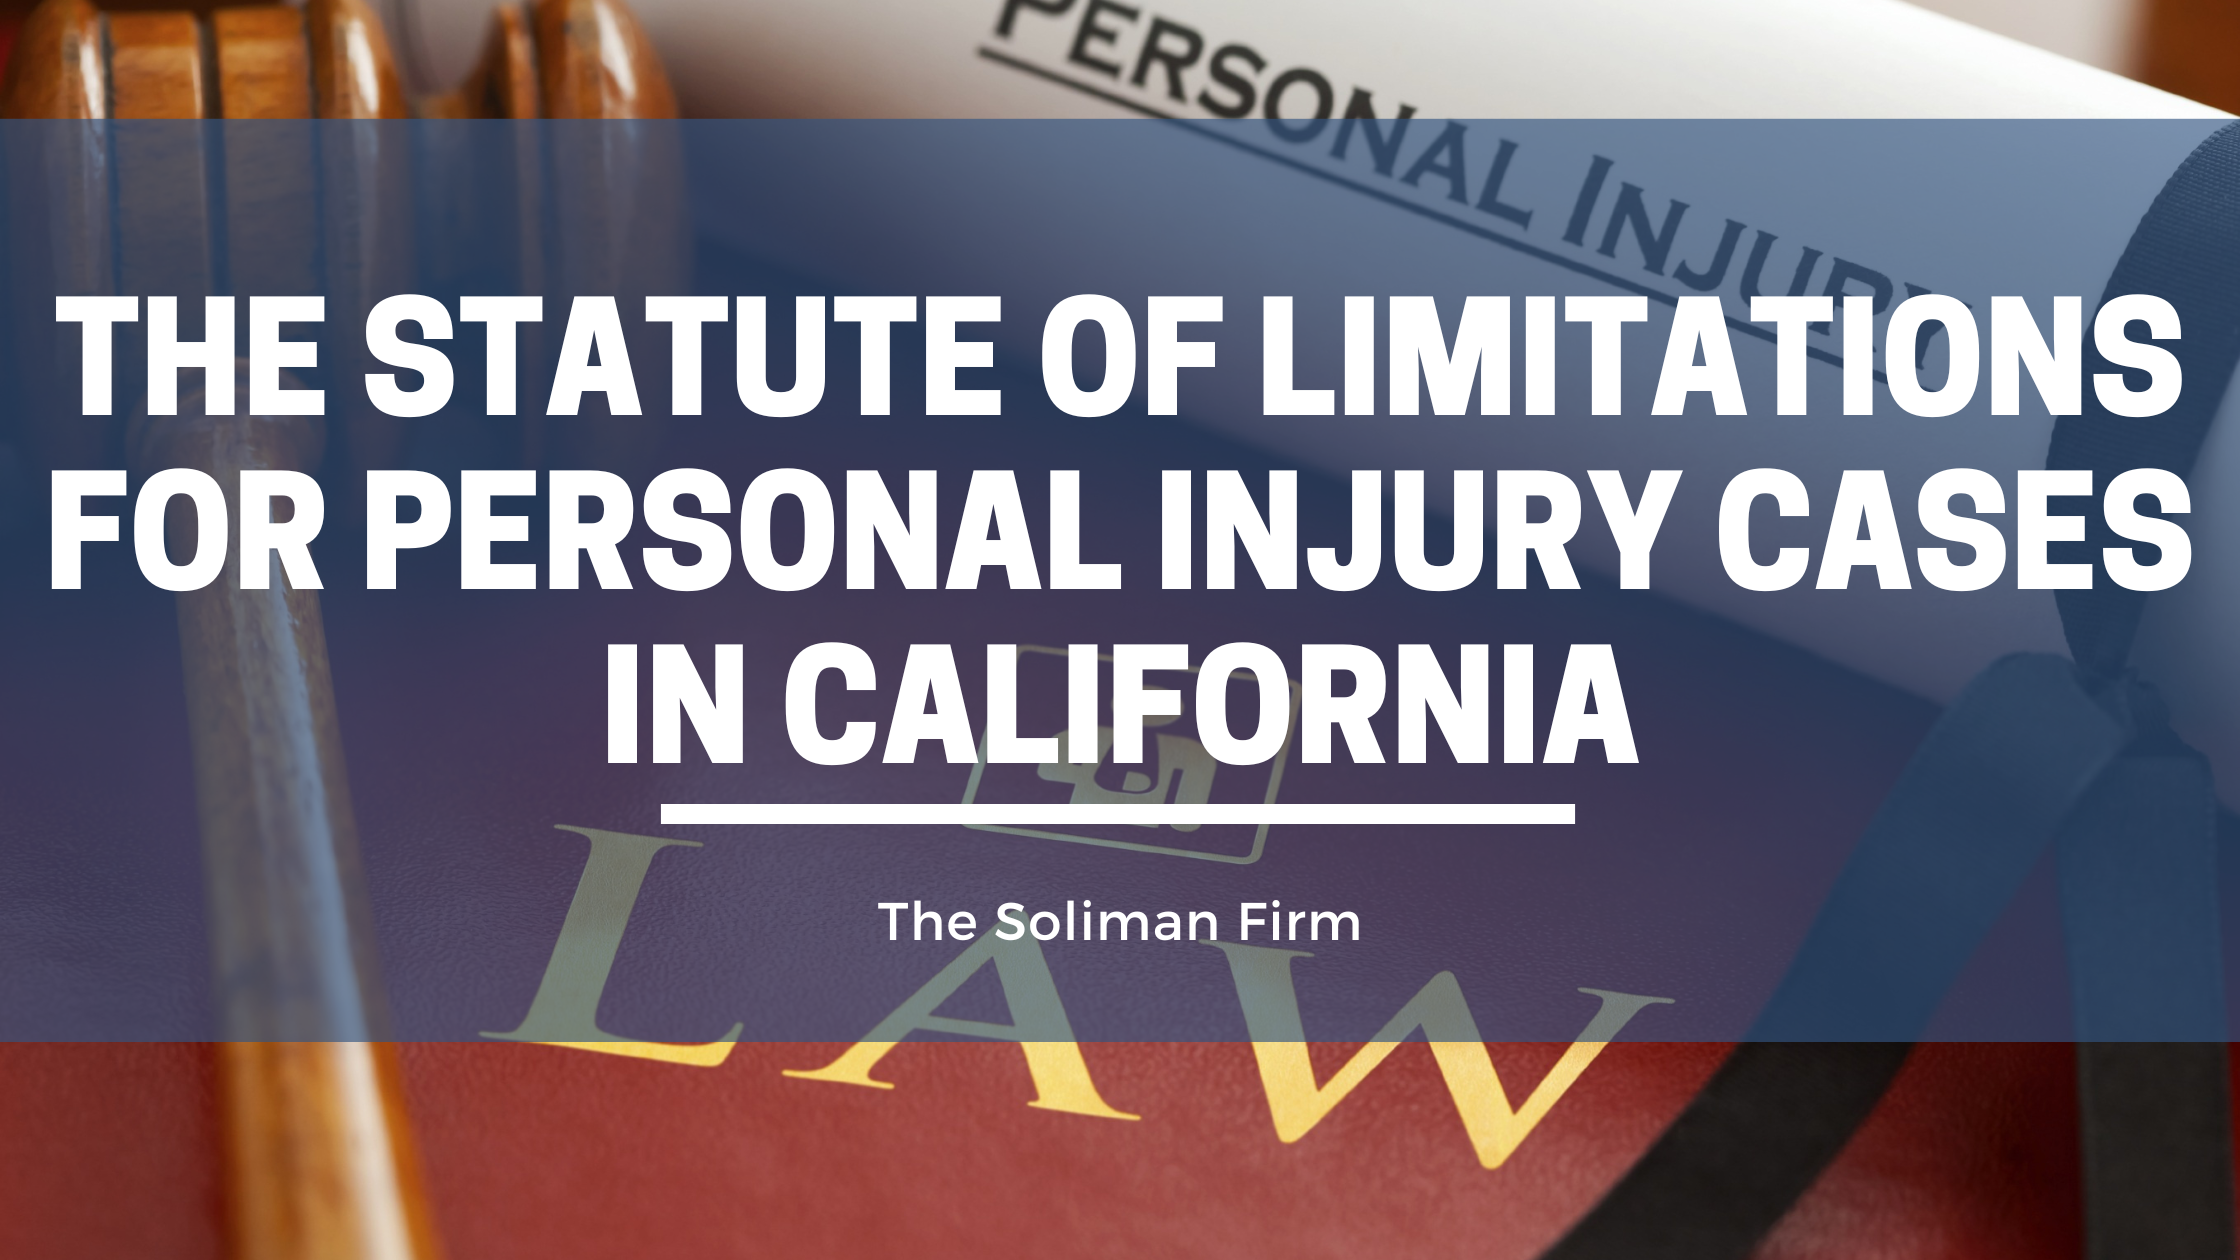 The Statute of Limitations for personal injury cases in California 